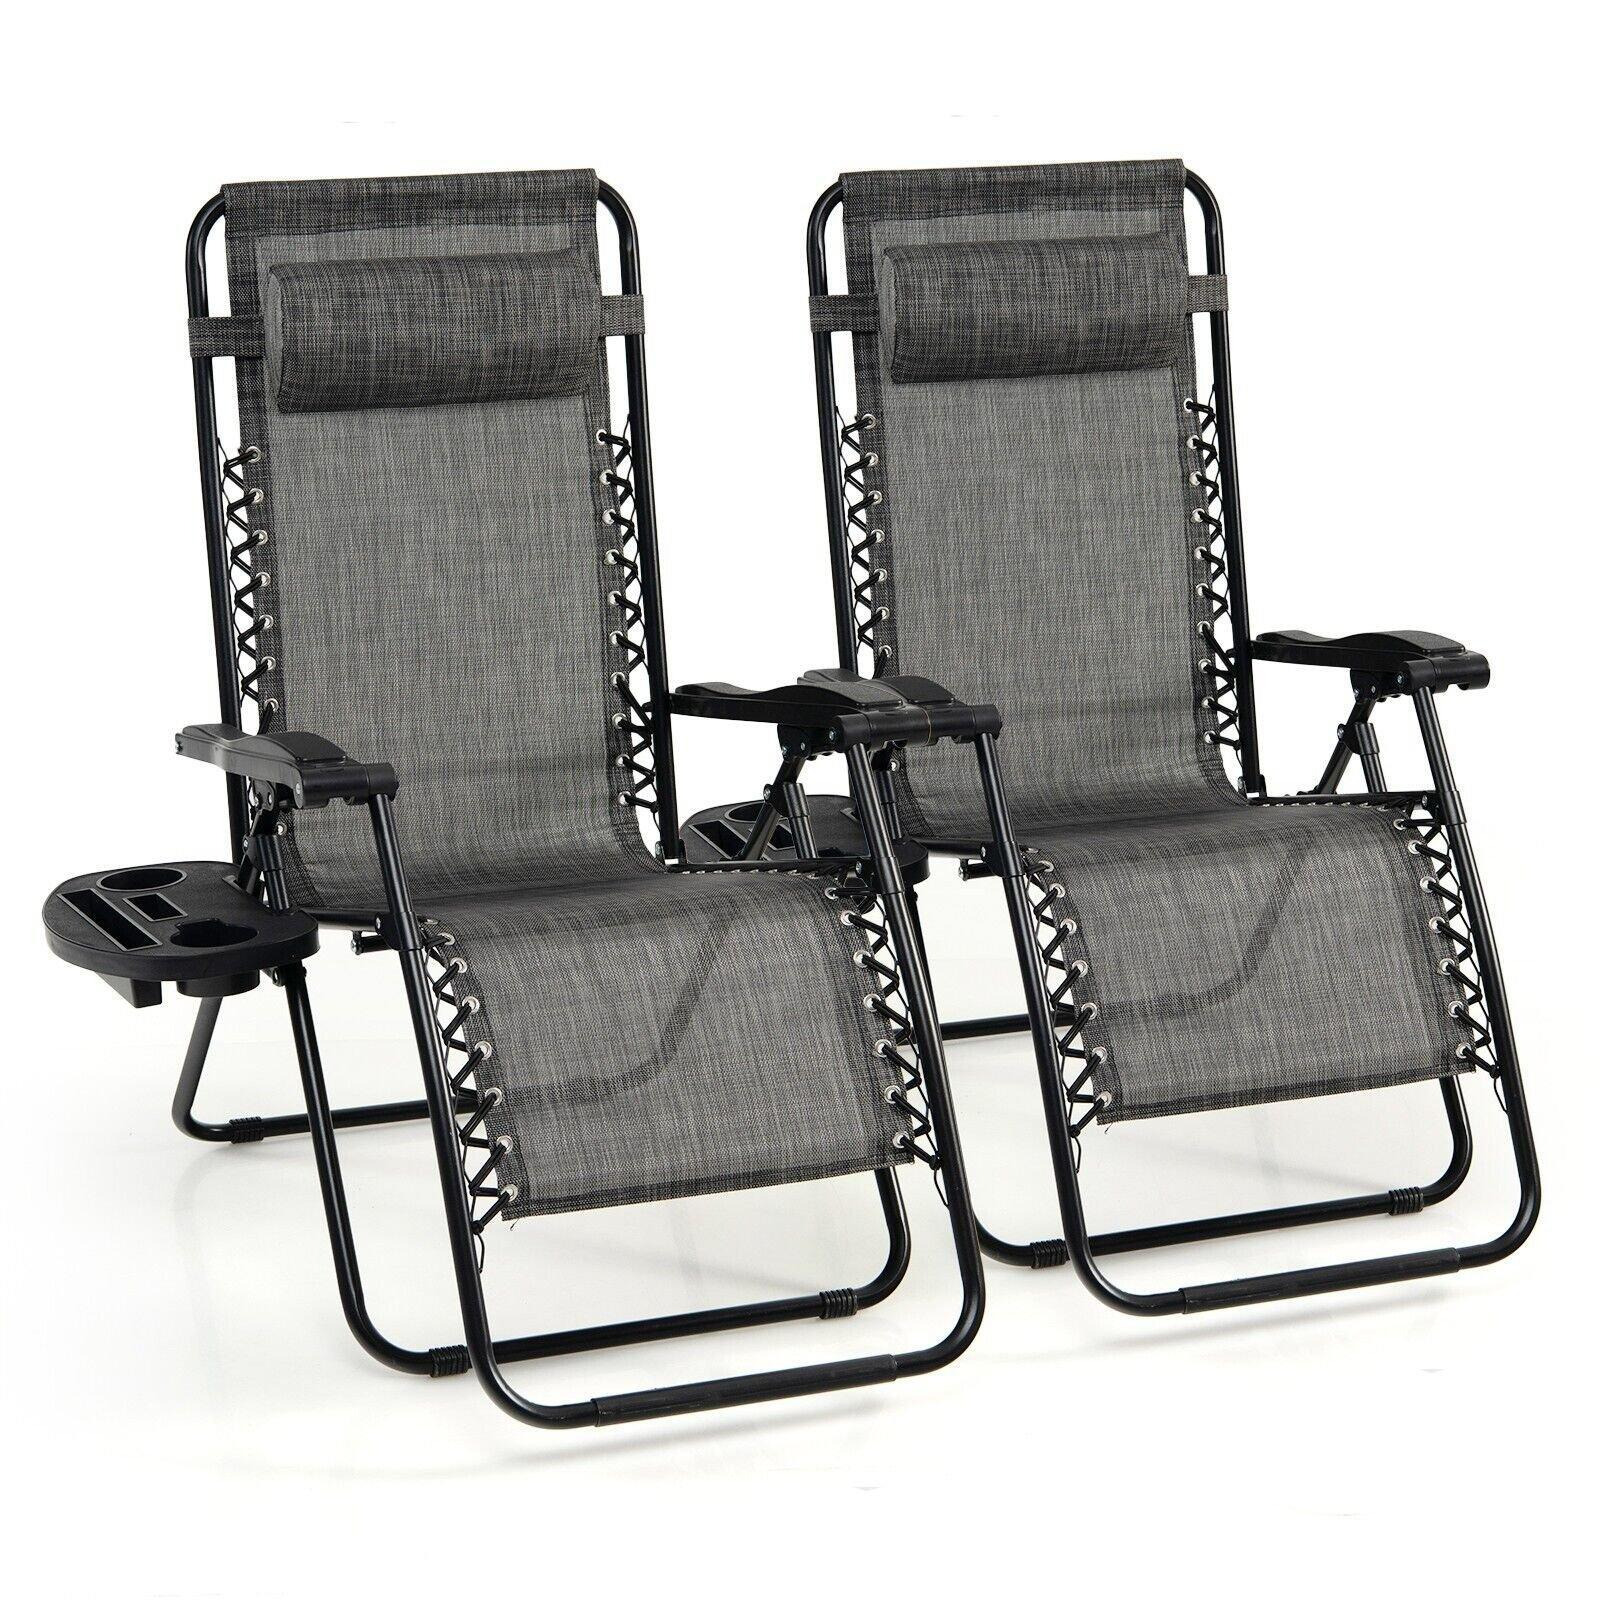 Set of 2 Folding Zero Gravity Chairs Outdoor Patio Recliners Removable Headrests - image 1